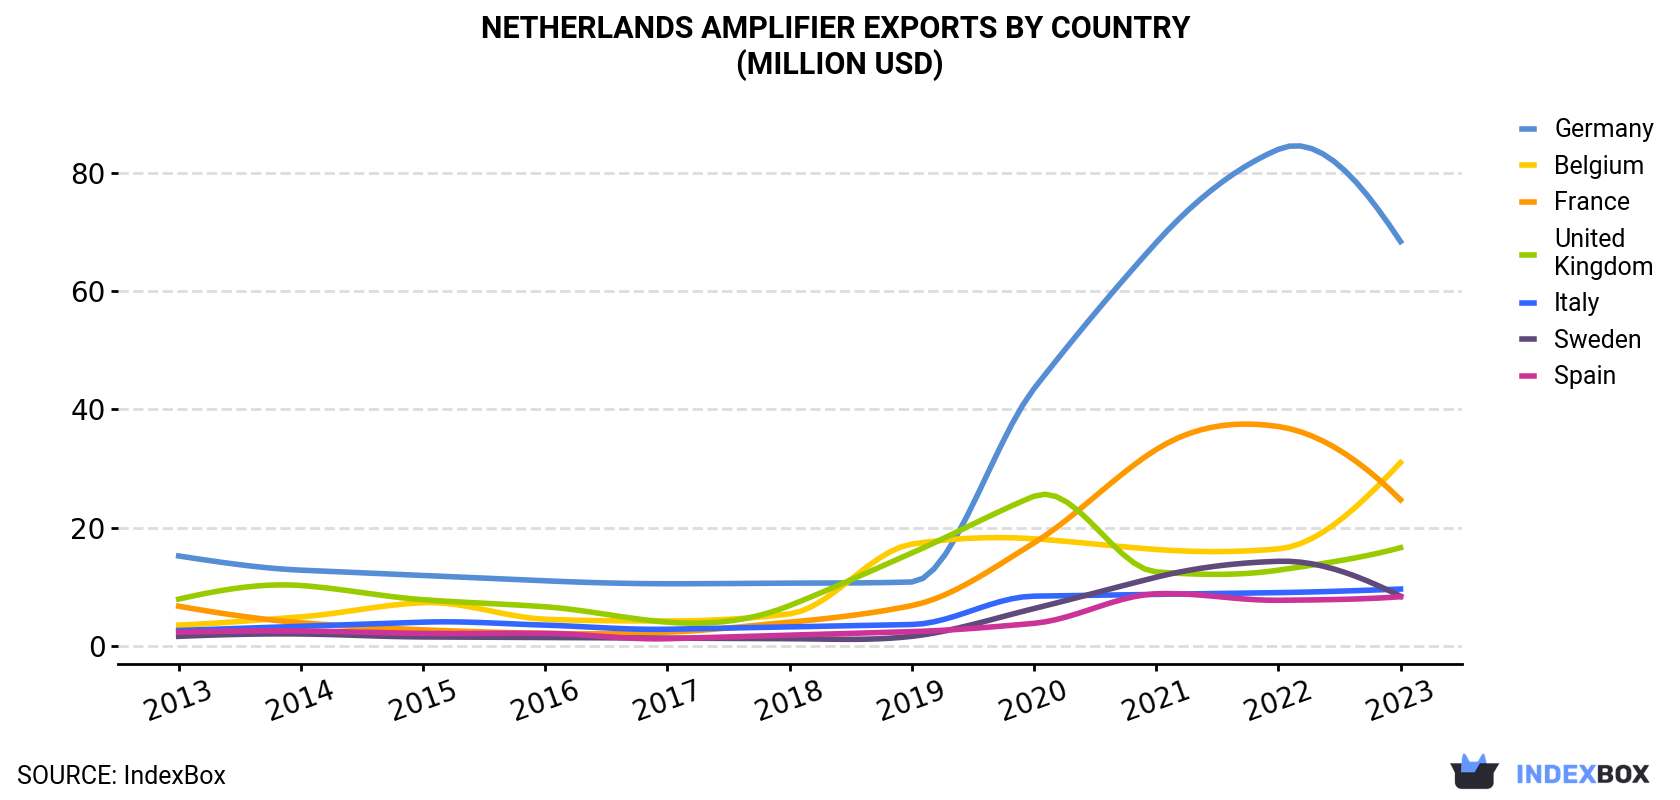 Netherlands Amplifier Exports By Country (Million USD)